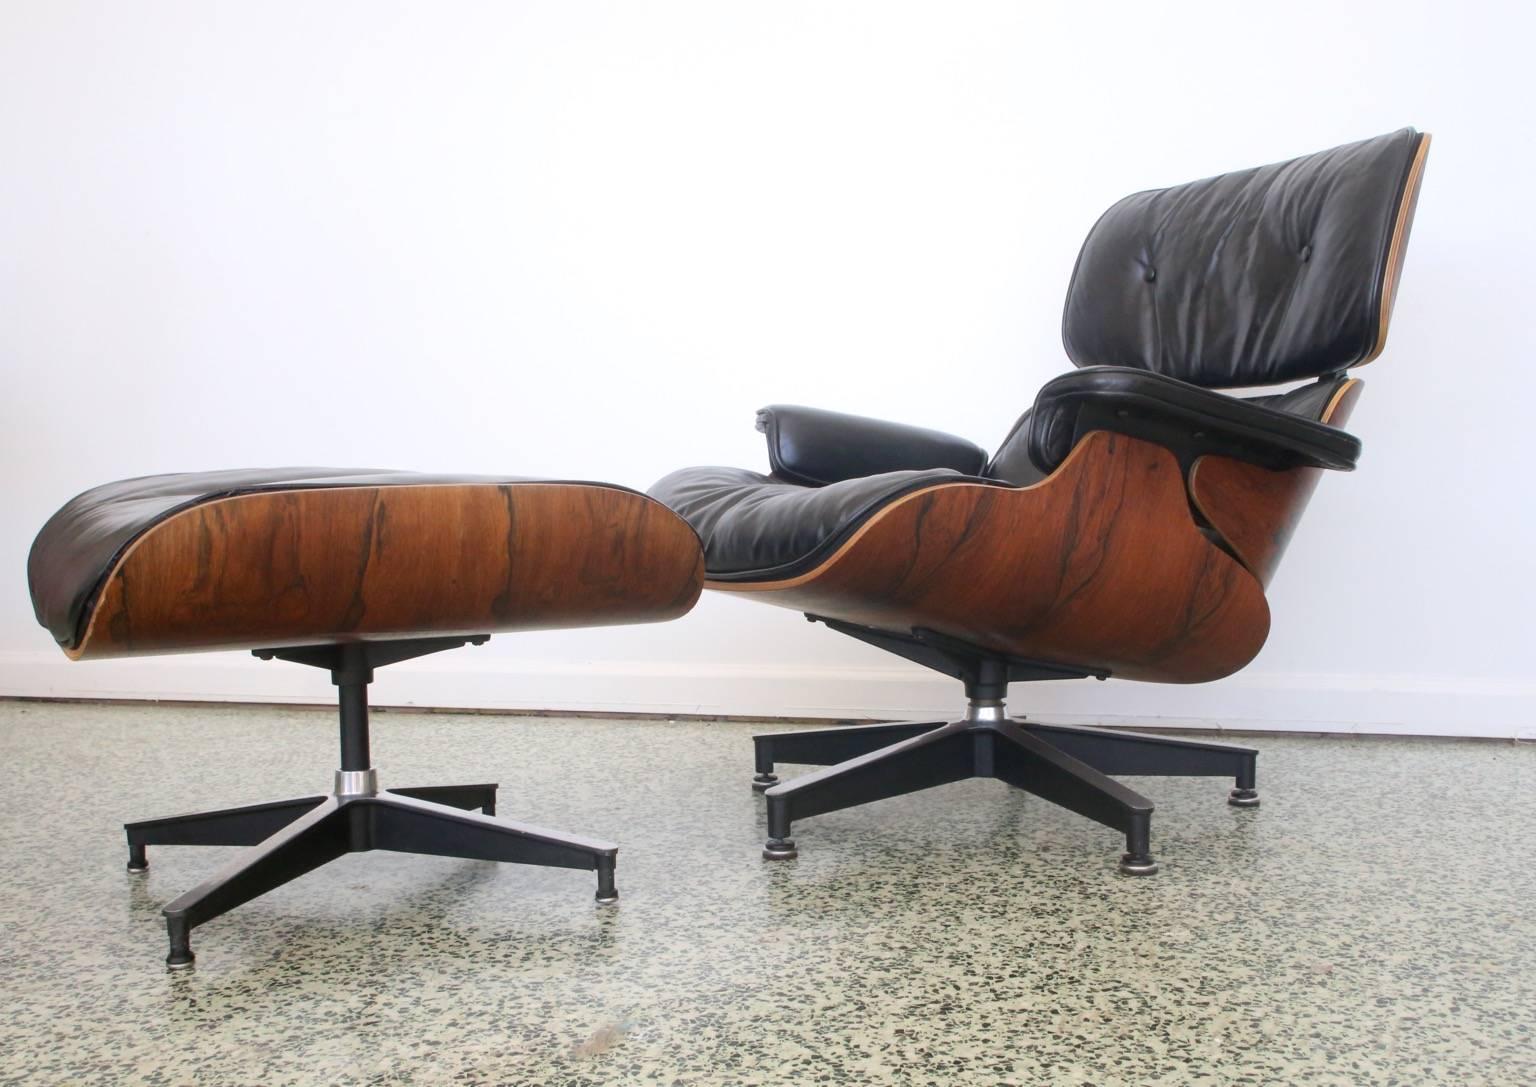 Herman Miller Eames rosewood 670/671 lounge chair and ottoman. Original leather upholstery and down/duck filled cushions. Three hole screw pattern on the armrests and boot glides which point to the very earliest production. Minor leather crackling